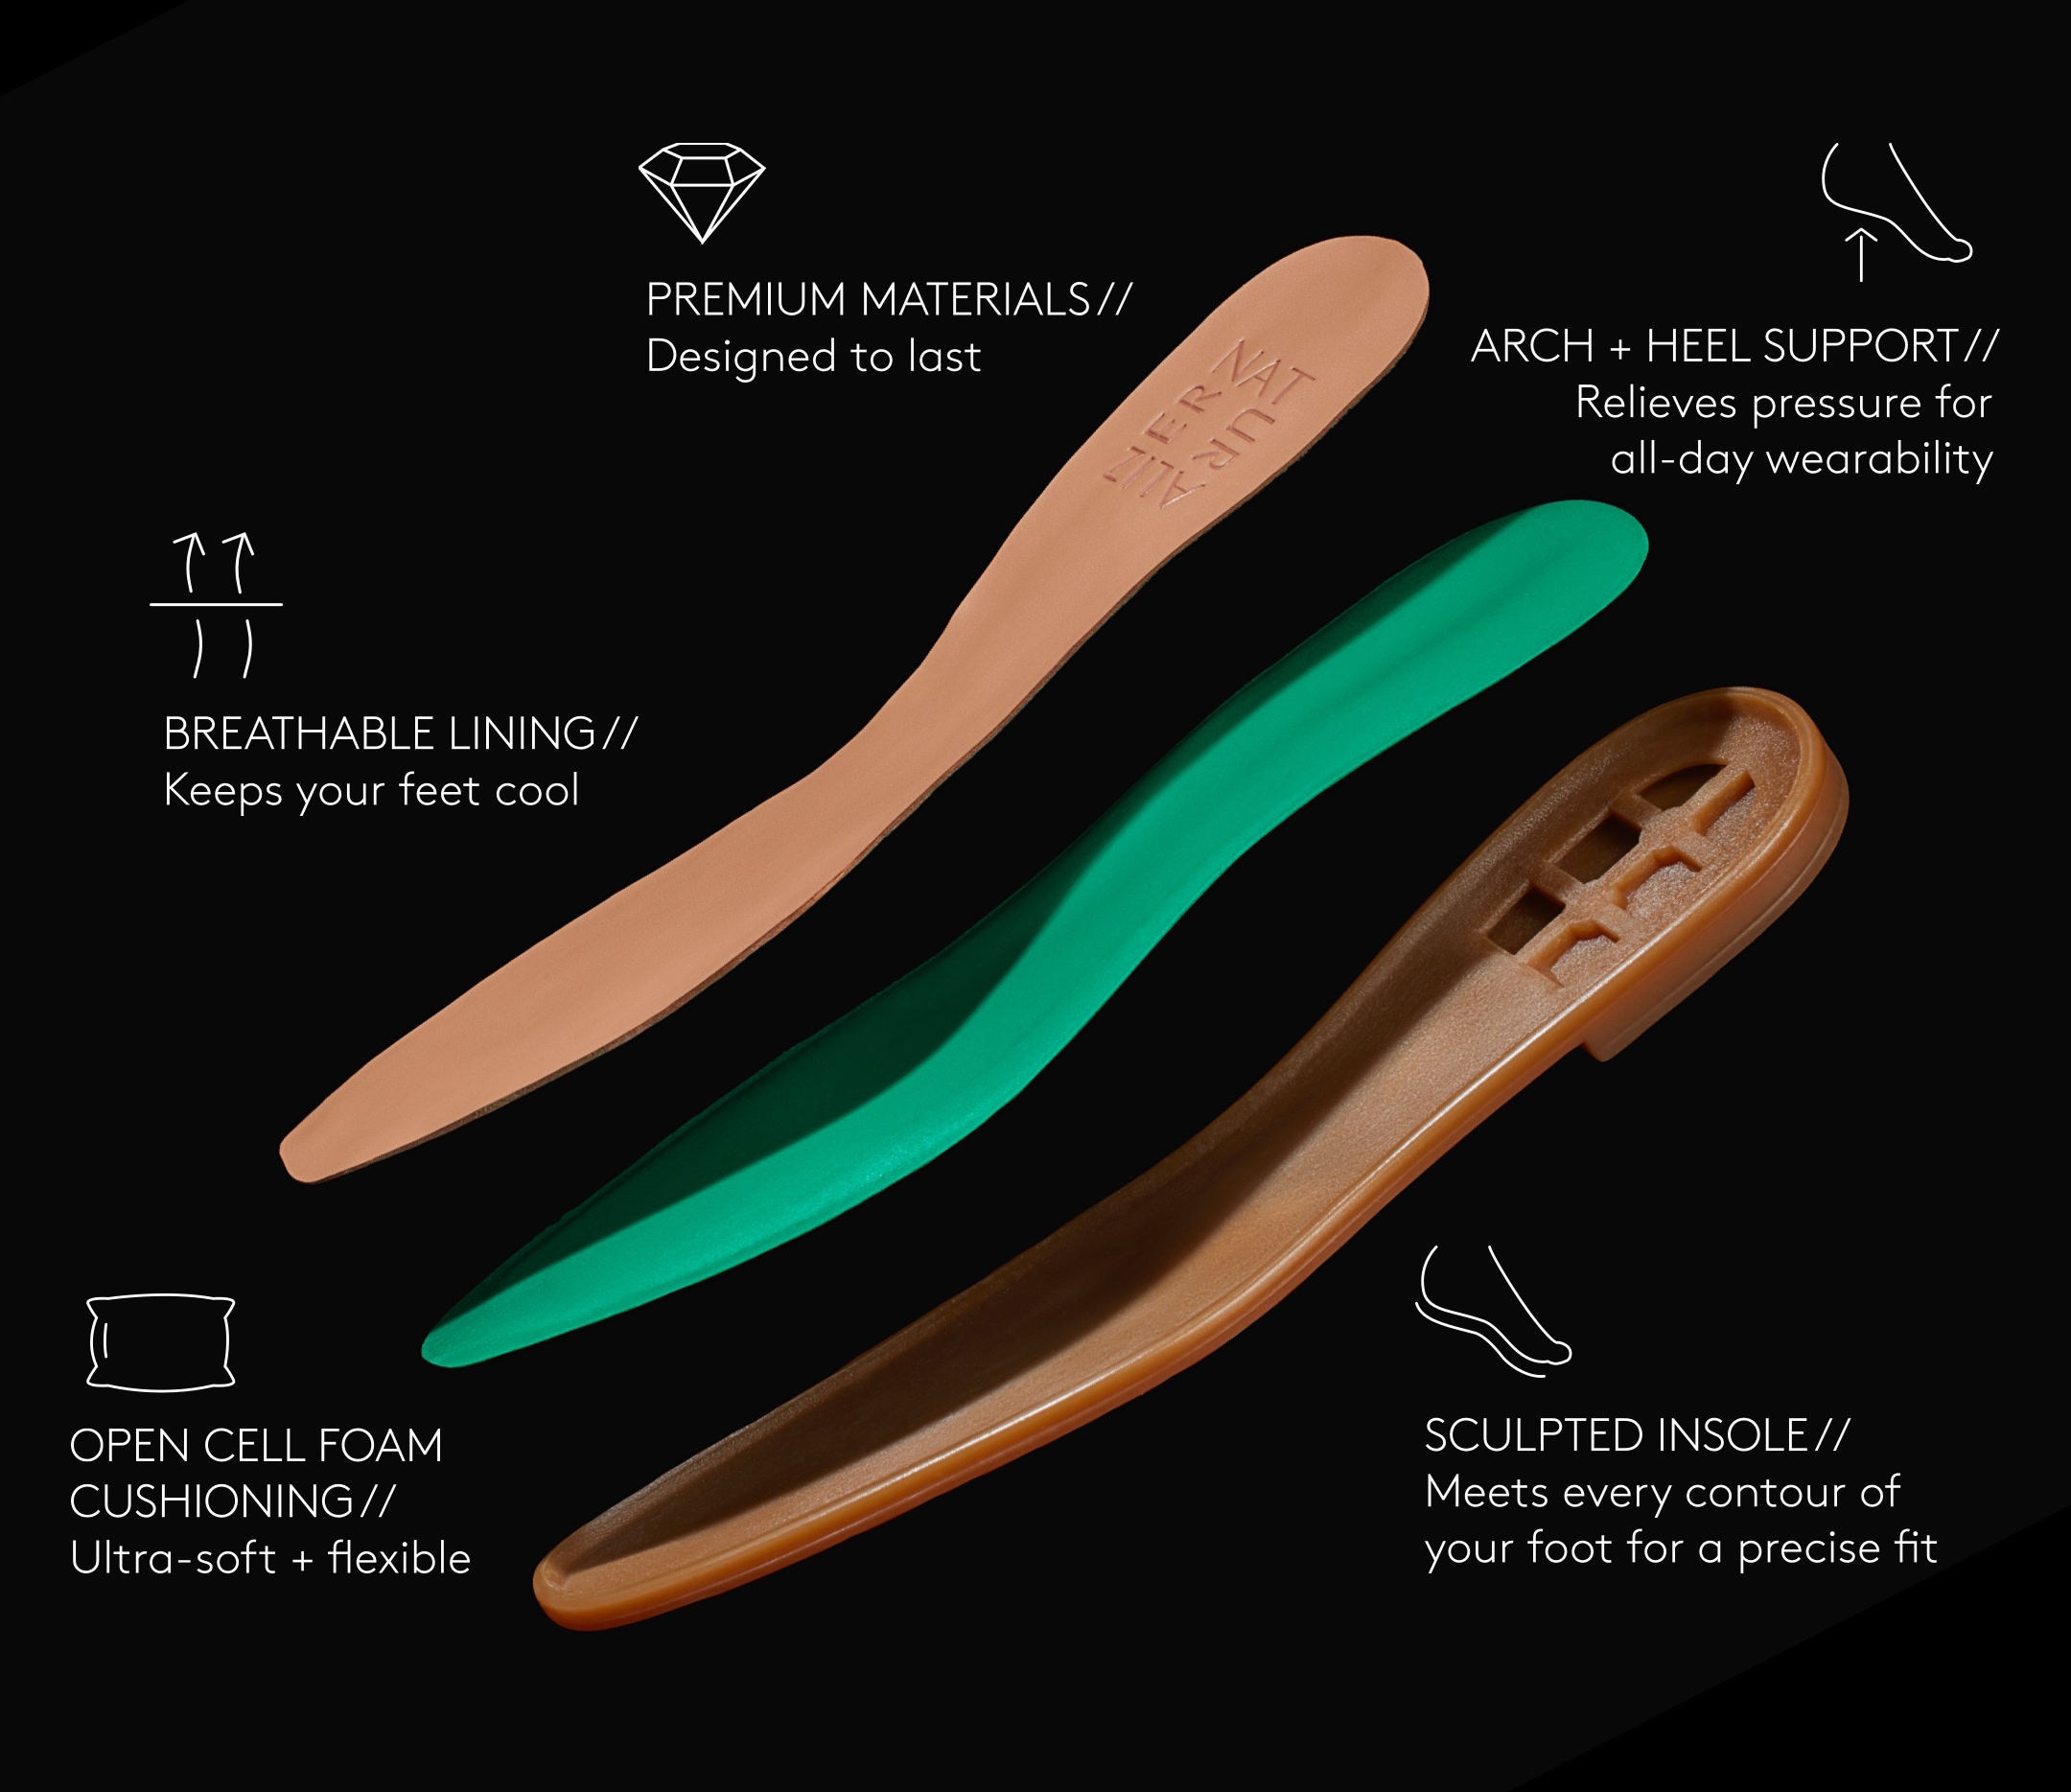 Premium materials designed to last. Arch and heel support relieves pressure for all-day wearability. Breathable lining keeps your feet cool. Open cell foam cushioning, ultra-soft and flexible. Sculpted insole meets every contour of your foot for a precise fit.